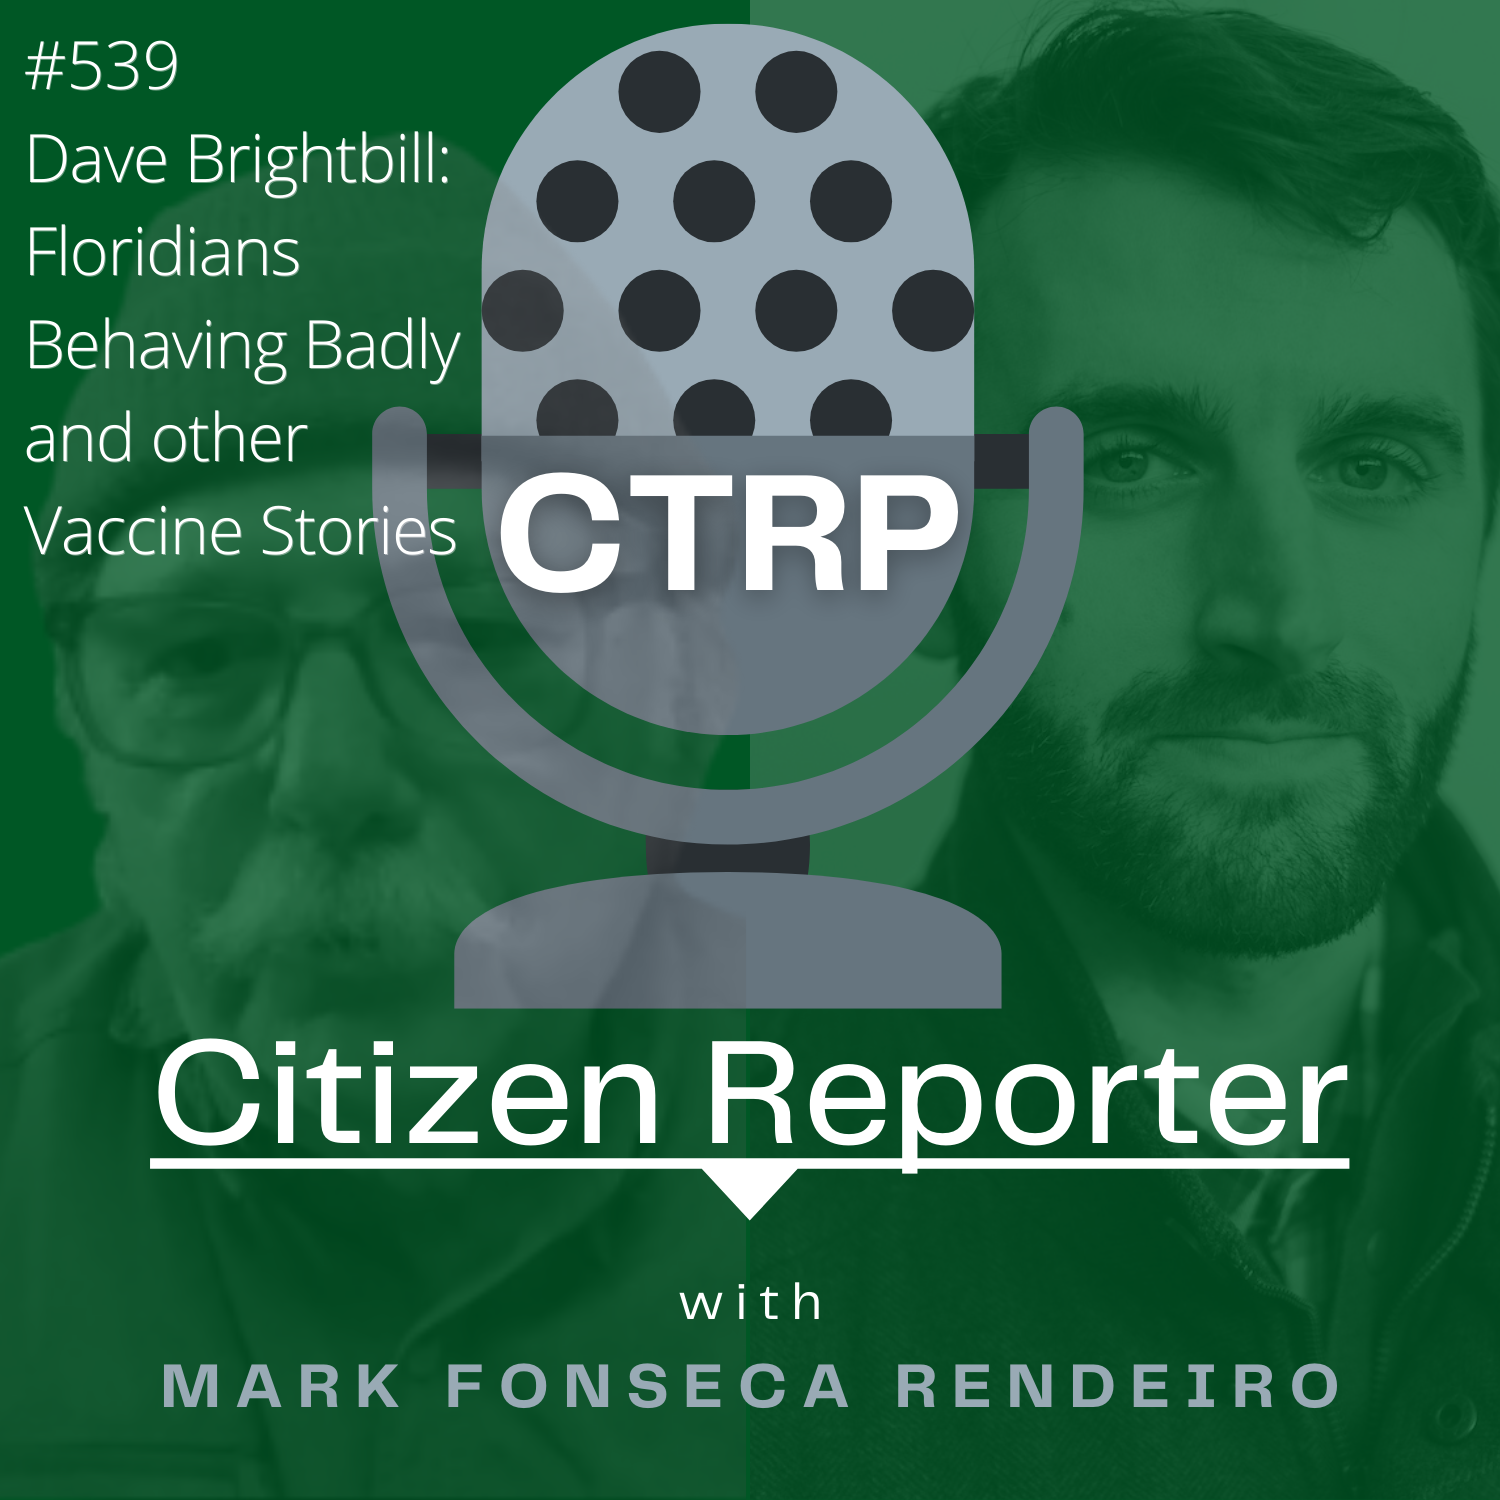 David Brightbill: Floridians Behaving Badly and other Vaccine Stories